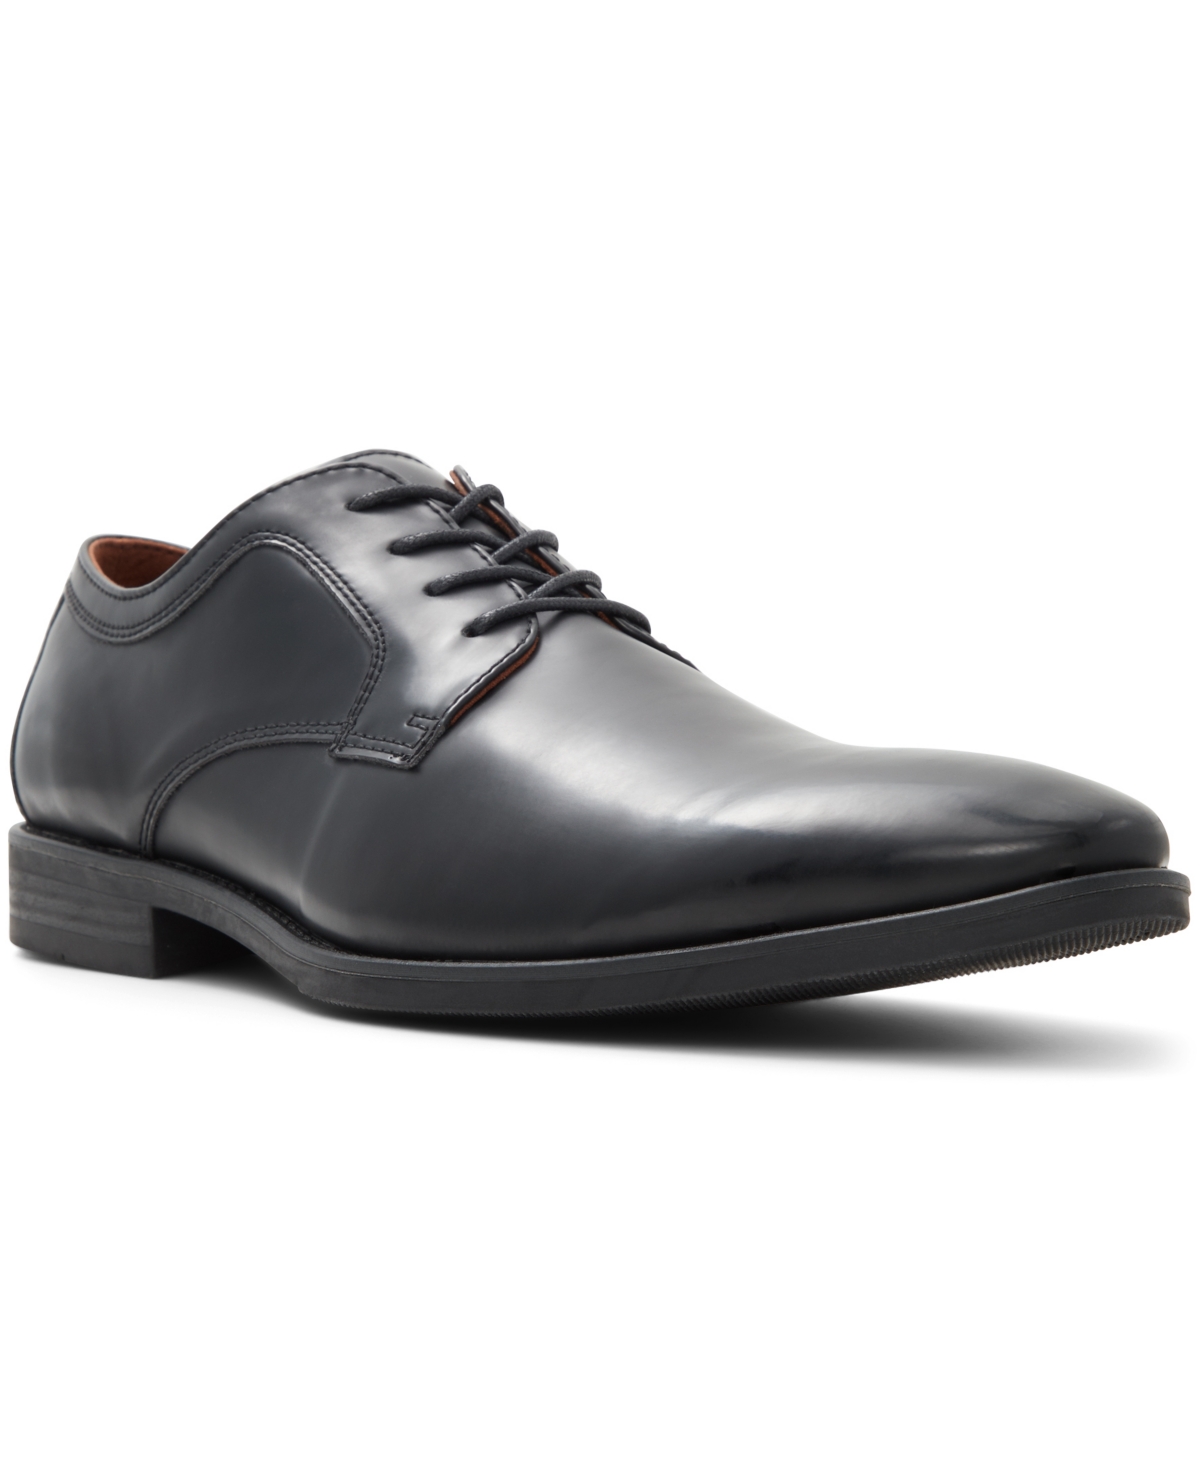 Men's Rippley Derby Lace-Up Oxford Shoes - Black